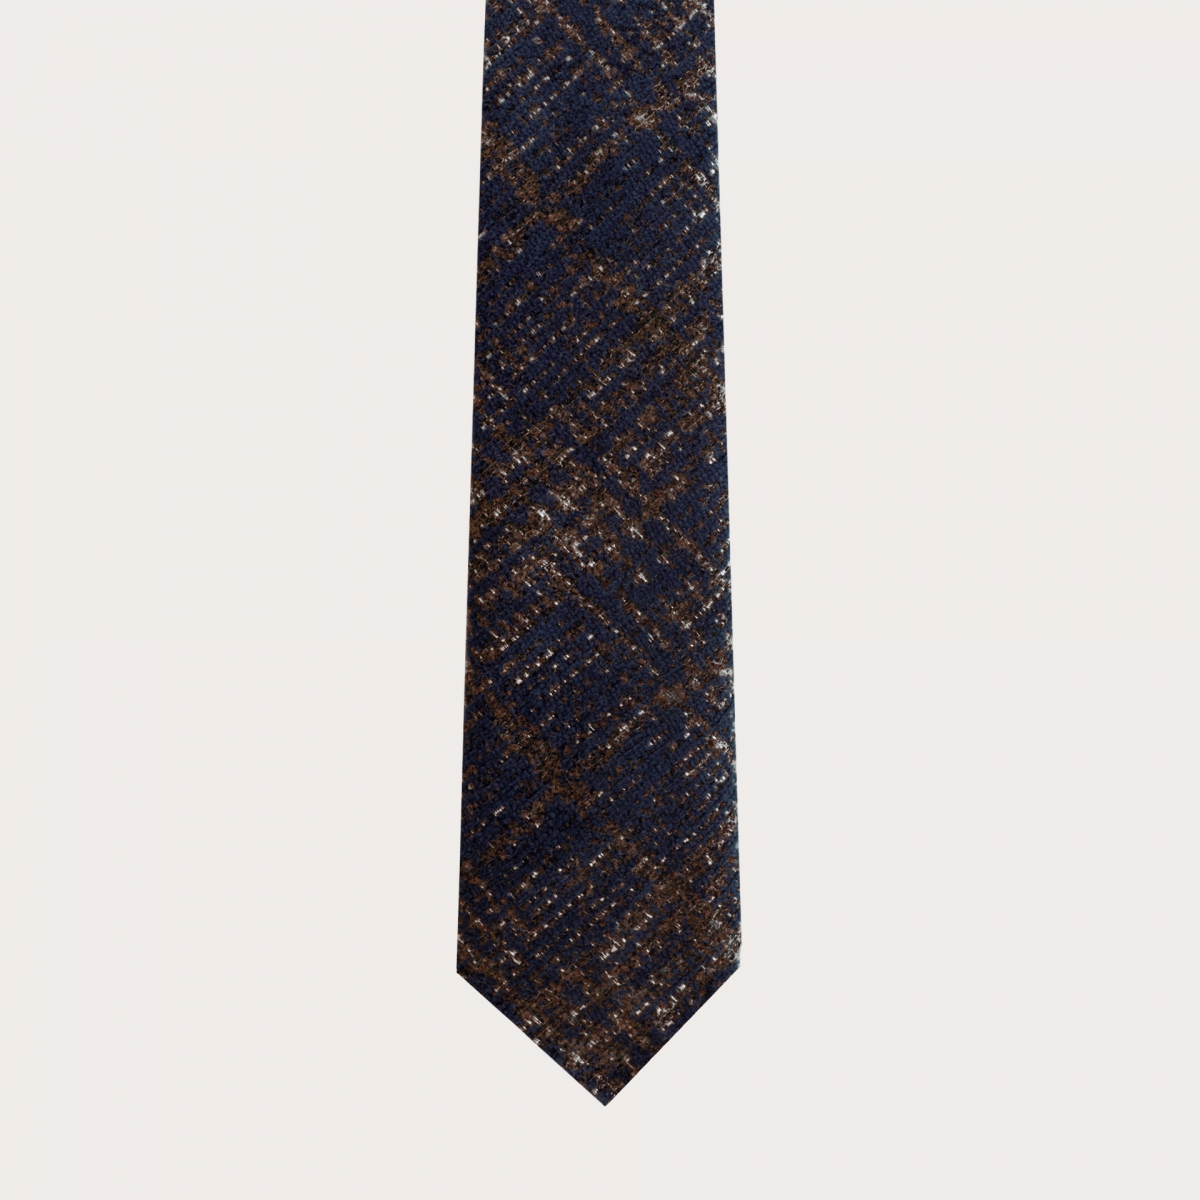 Unlined necktie in wool and silk, blue and brown tartan